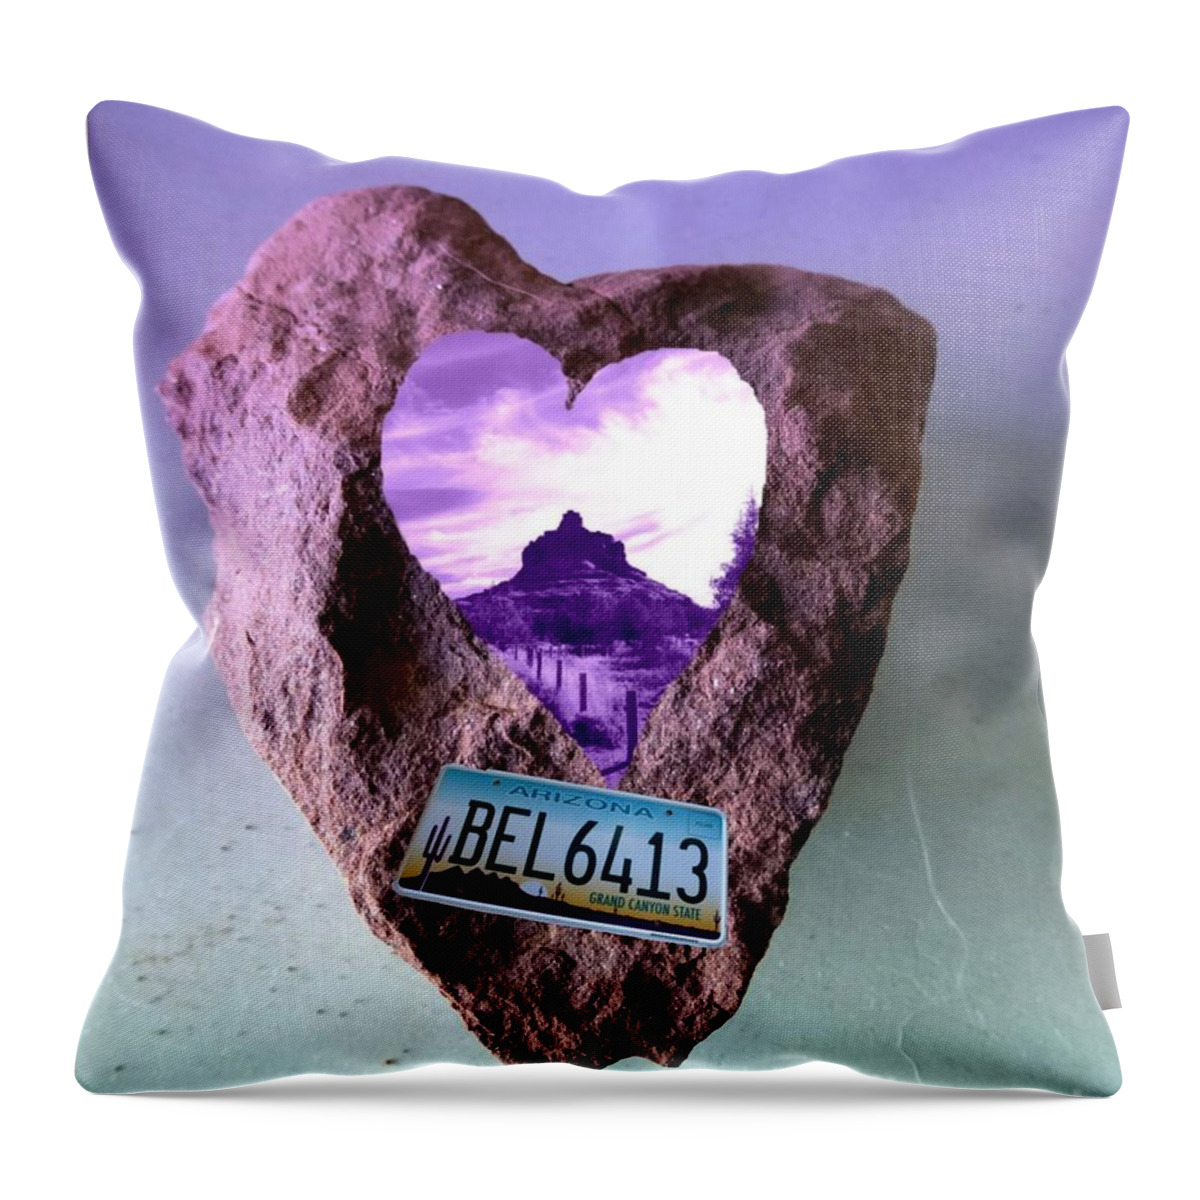 Heart Throw Pillow featuring the photograph Bell Rock 6413 Serendipity by Mars Besso